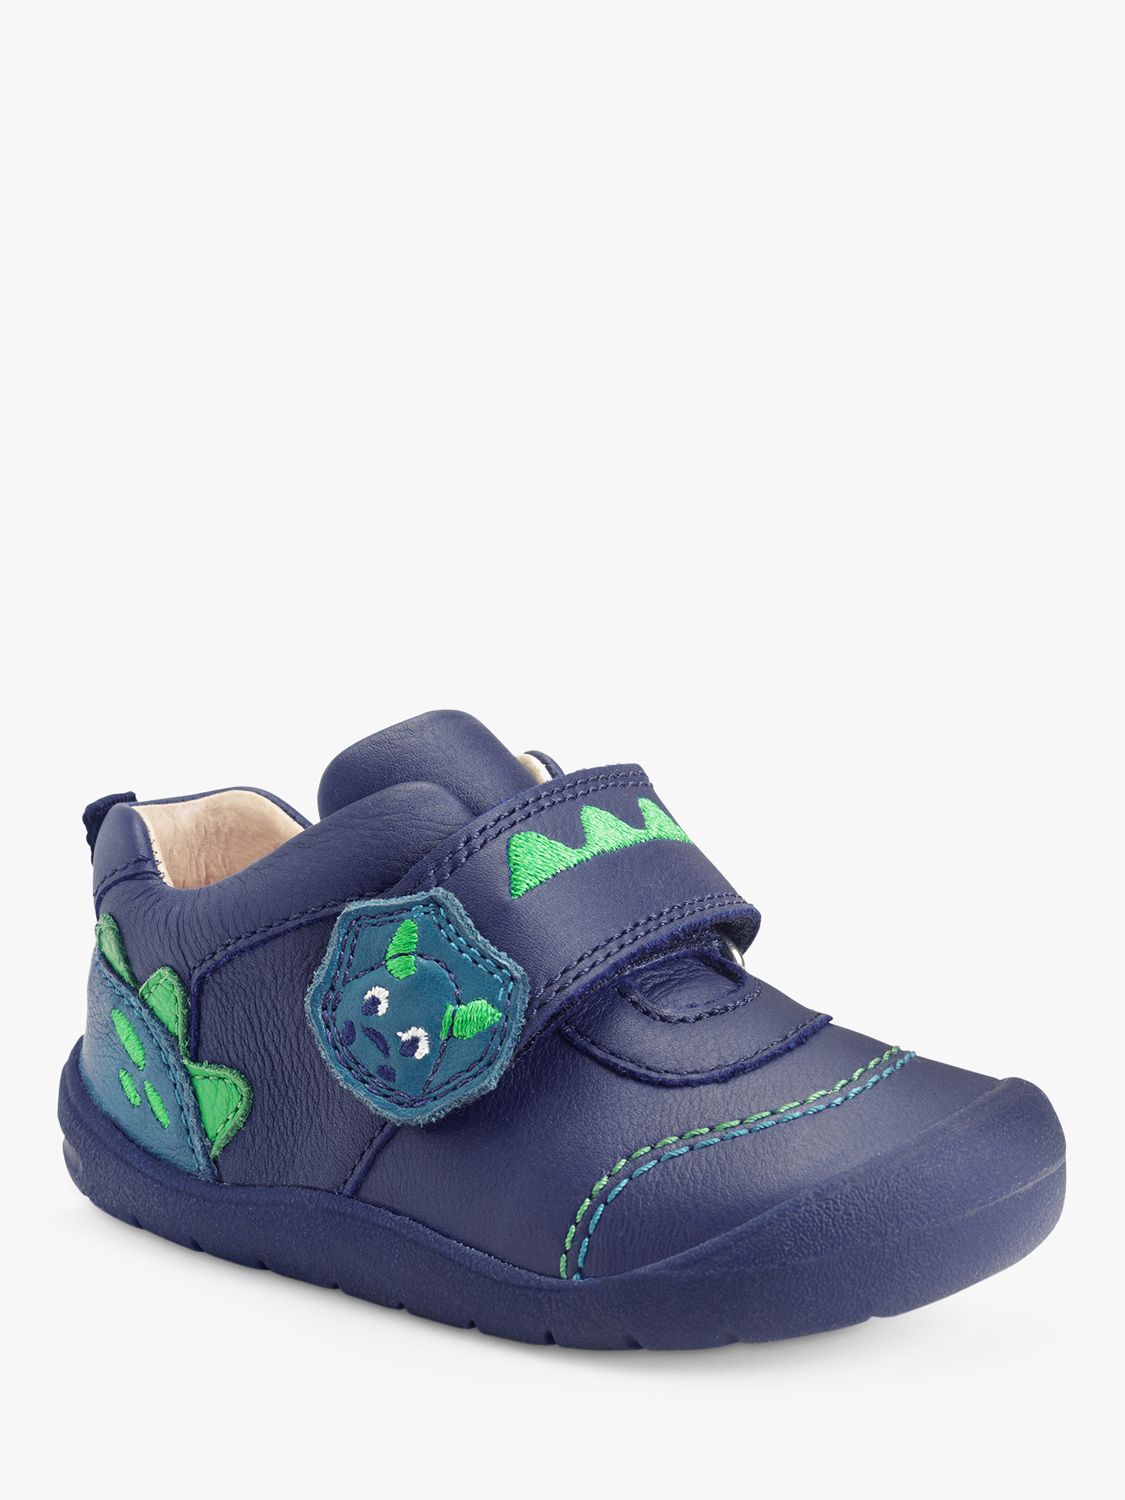 Buy Start-Rite Baby Dino Foot First Steps Leather Shoes Online at johnlewis.com